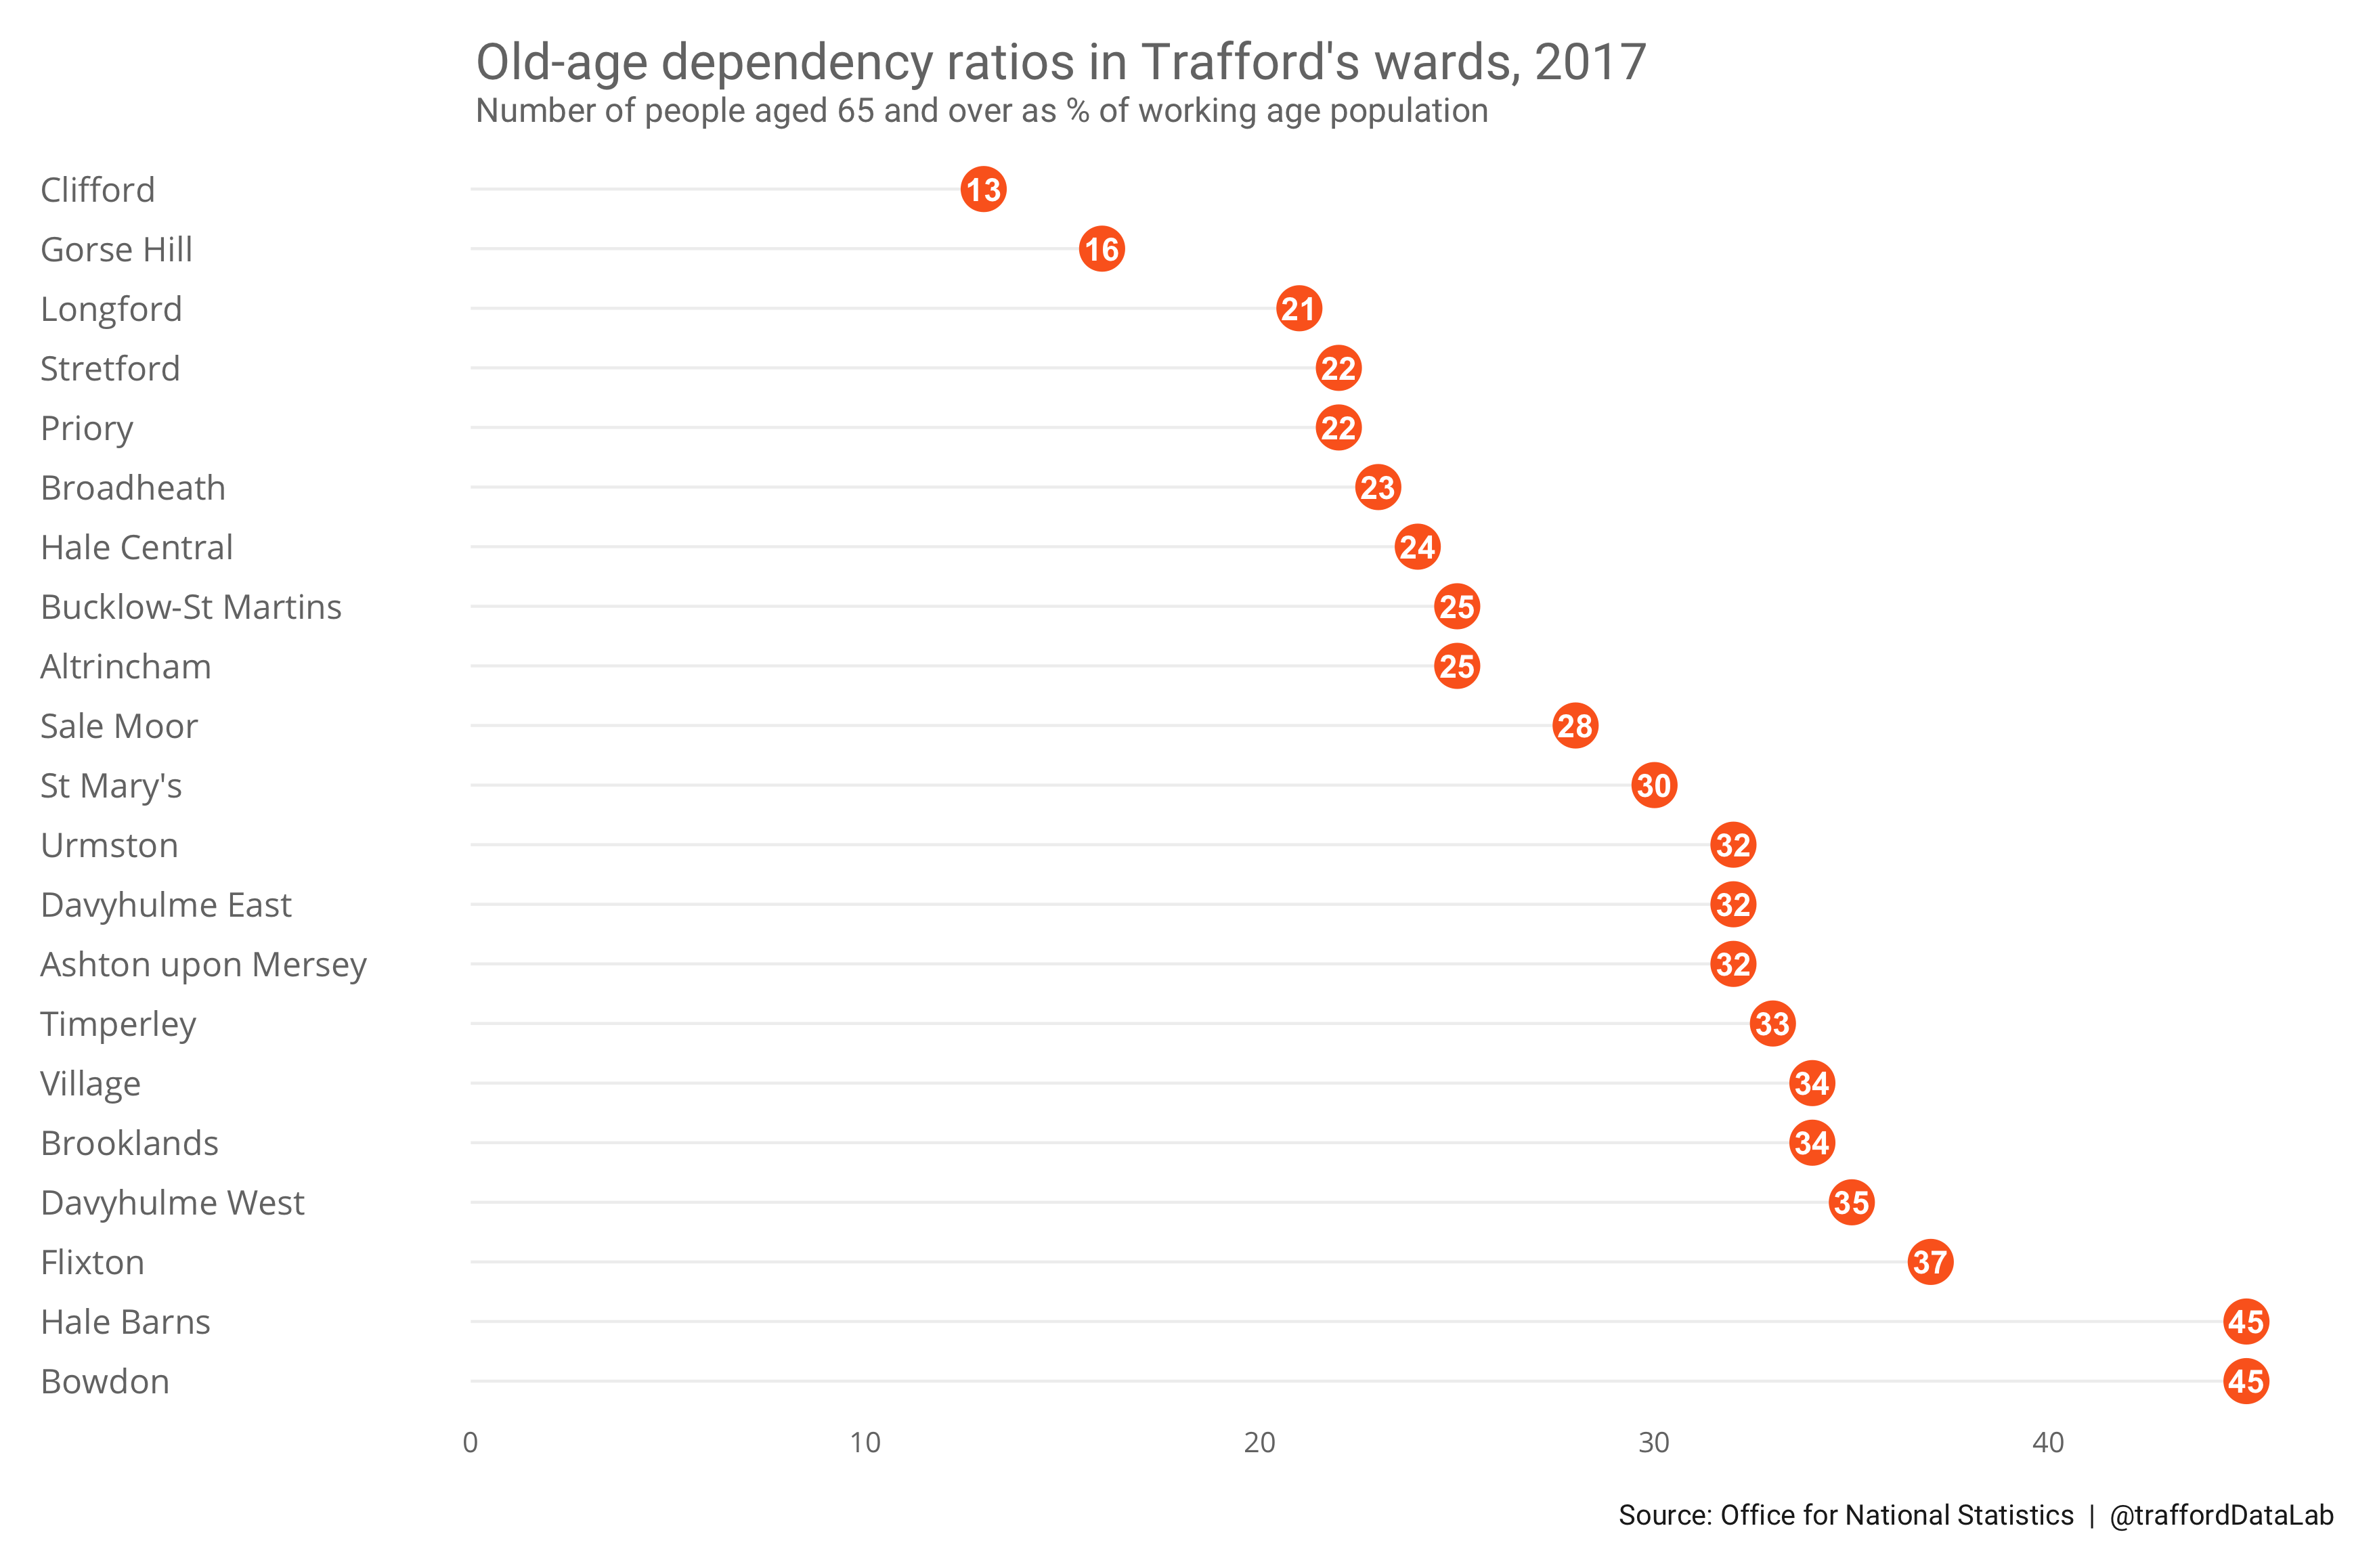 Old-age dependency ratios in Trafford's wards, 2017.